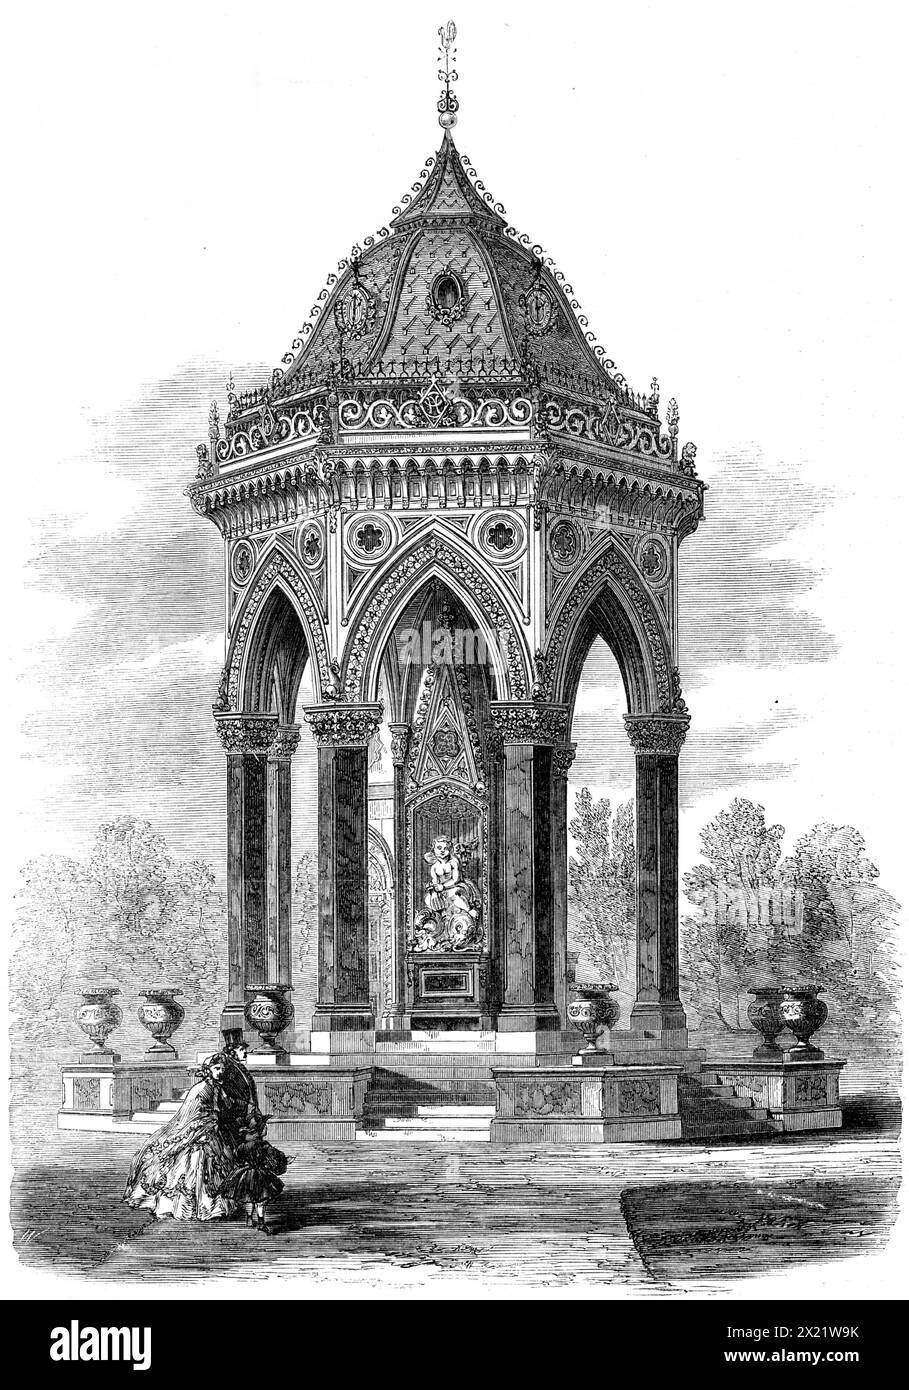 Drinking-fountain in Victoria Park, the gift of Miss Burdett Coutts, 1862. 'Its arrangement is octangular...Its masonry consists of Portland and Kentish ragstone, Gazeby stone being employed for the steps and paving...The exterior consists of eight piers of polished Peterhead granite, with carved capitals of Aubigny stone...The spandrils of the arches contain...slabs of polished marble. Above these rises the principal cornice...enriched with red and green marbles...Four of its sides are occupied by the fountains...on the eighth [side] is situated the entrance to a chamber which affords access Stock Photo